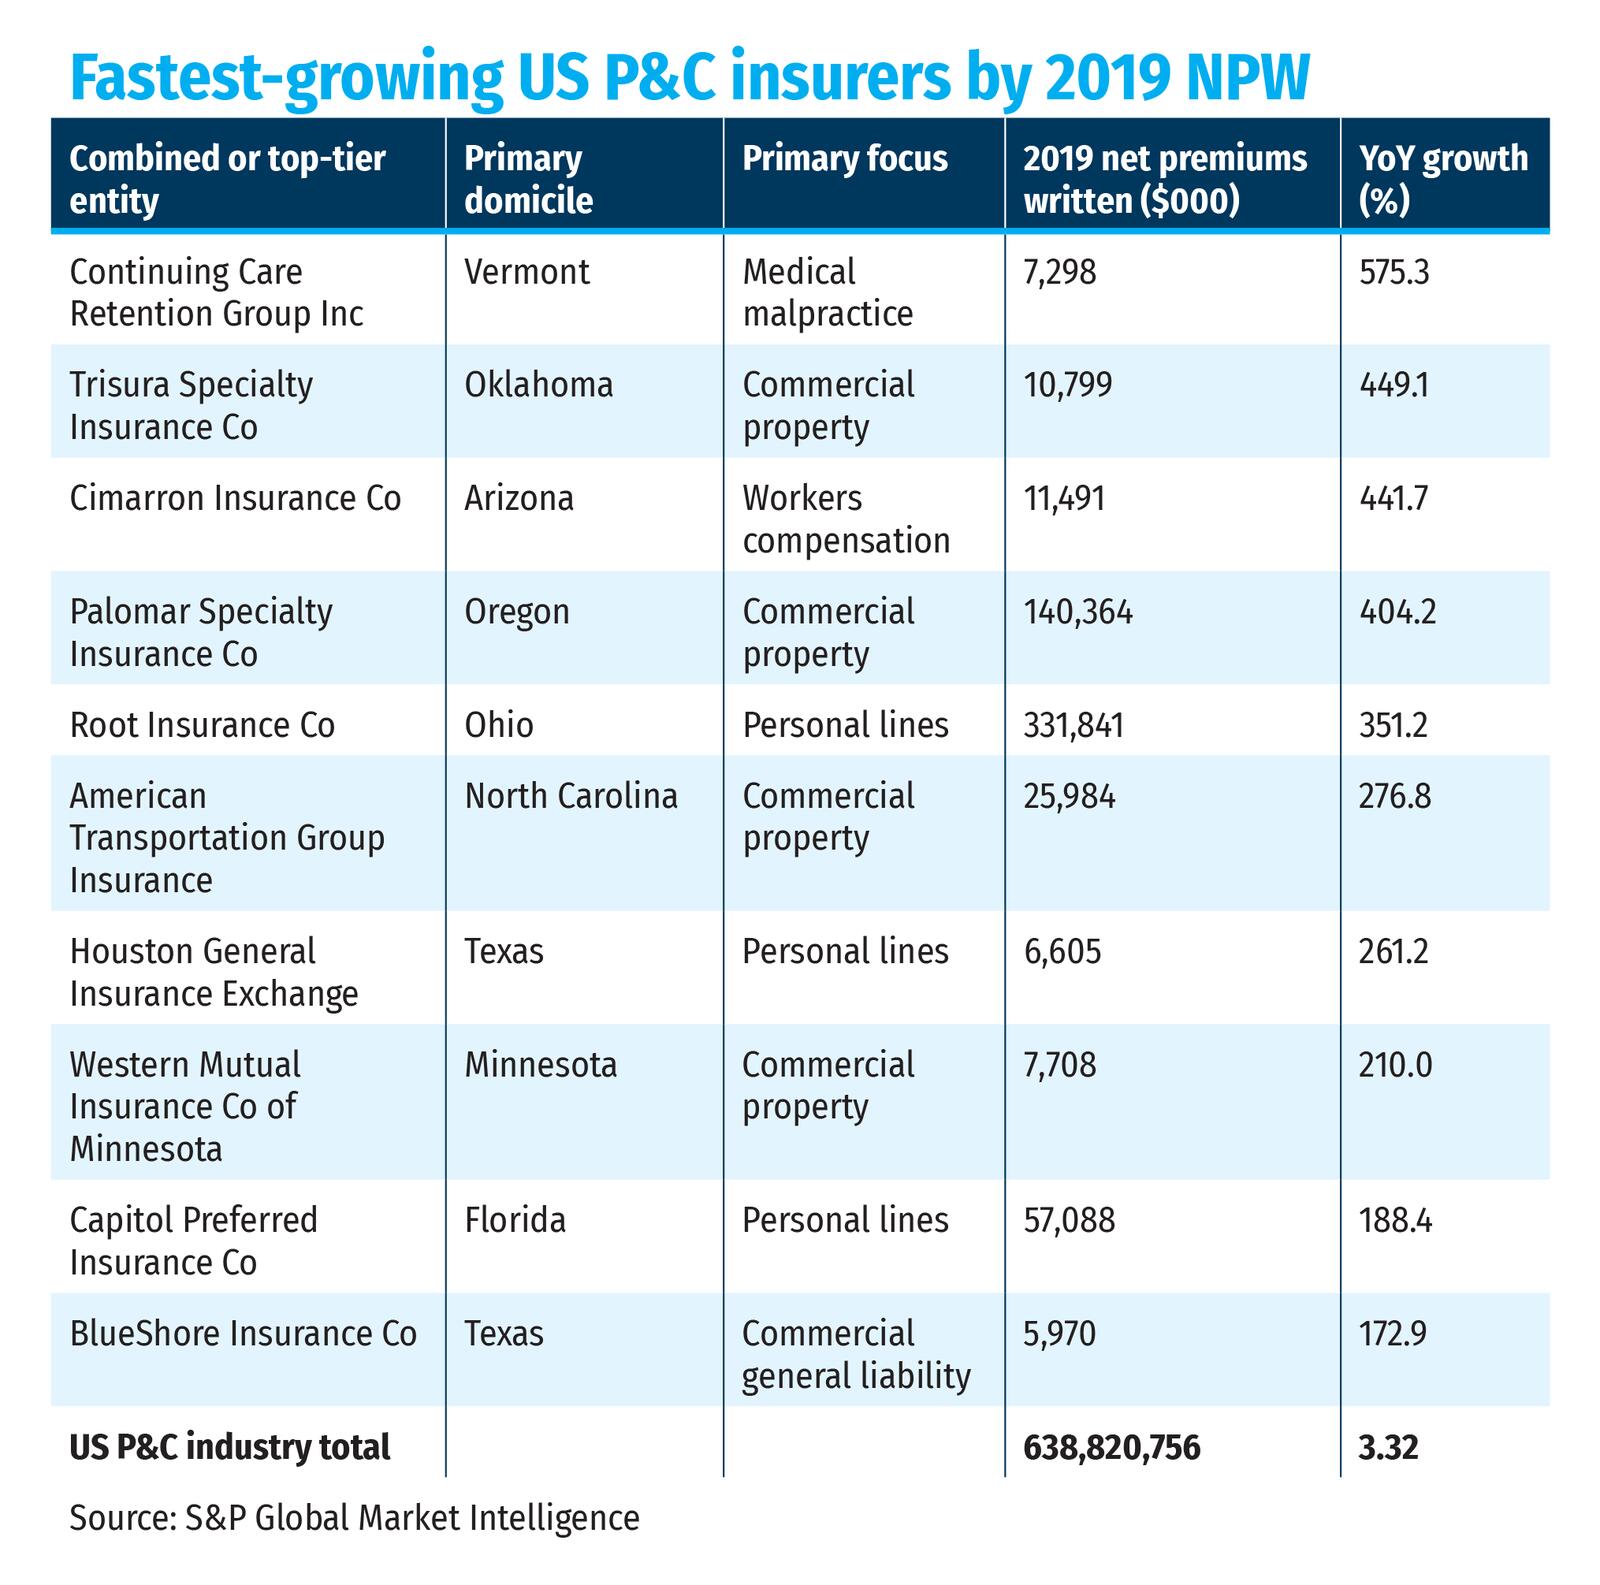 Fastest-growing US P&C insurers by 2019 NPW